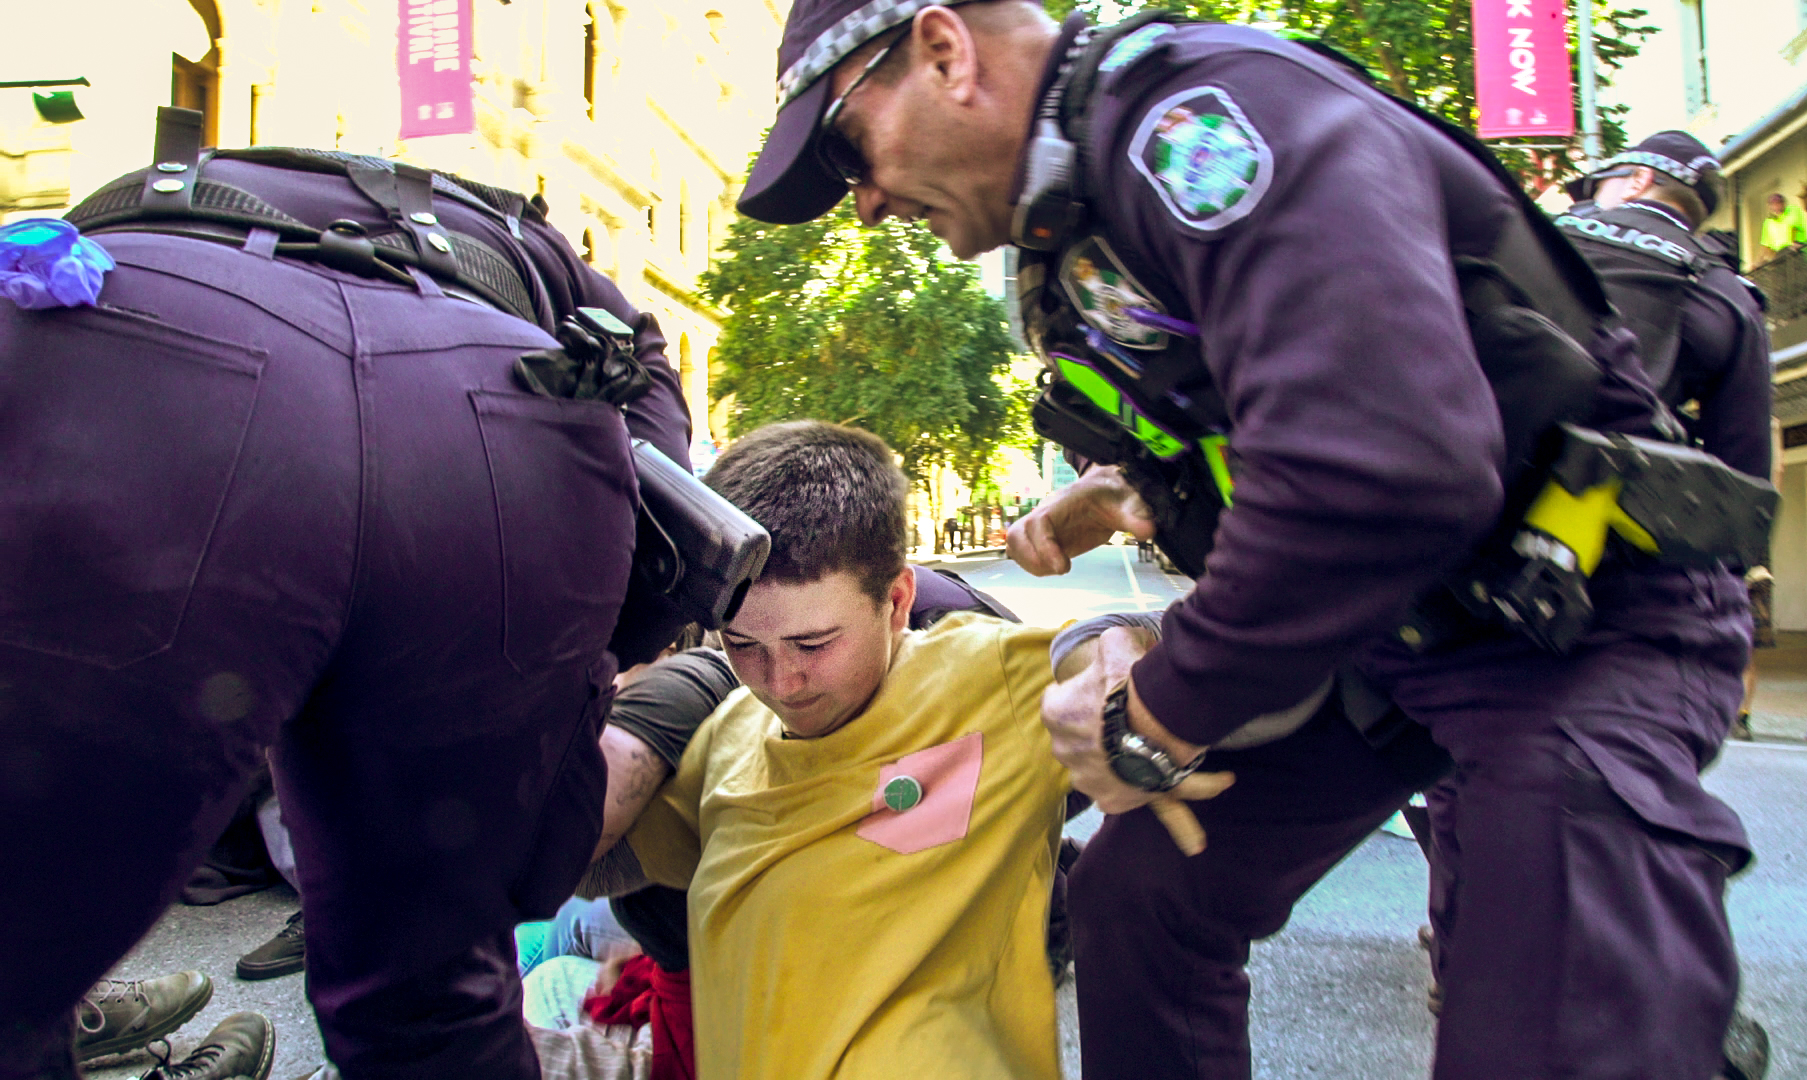 Bega local one of 72 arrested during Brisbane climate protests this week